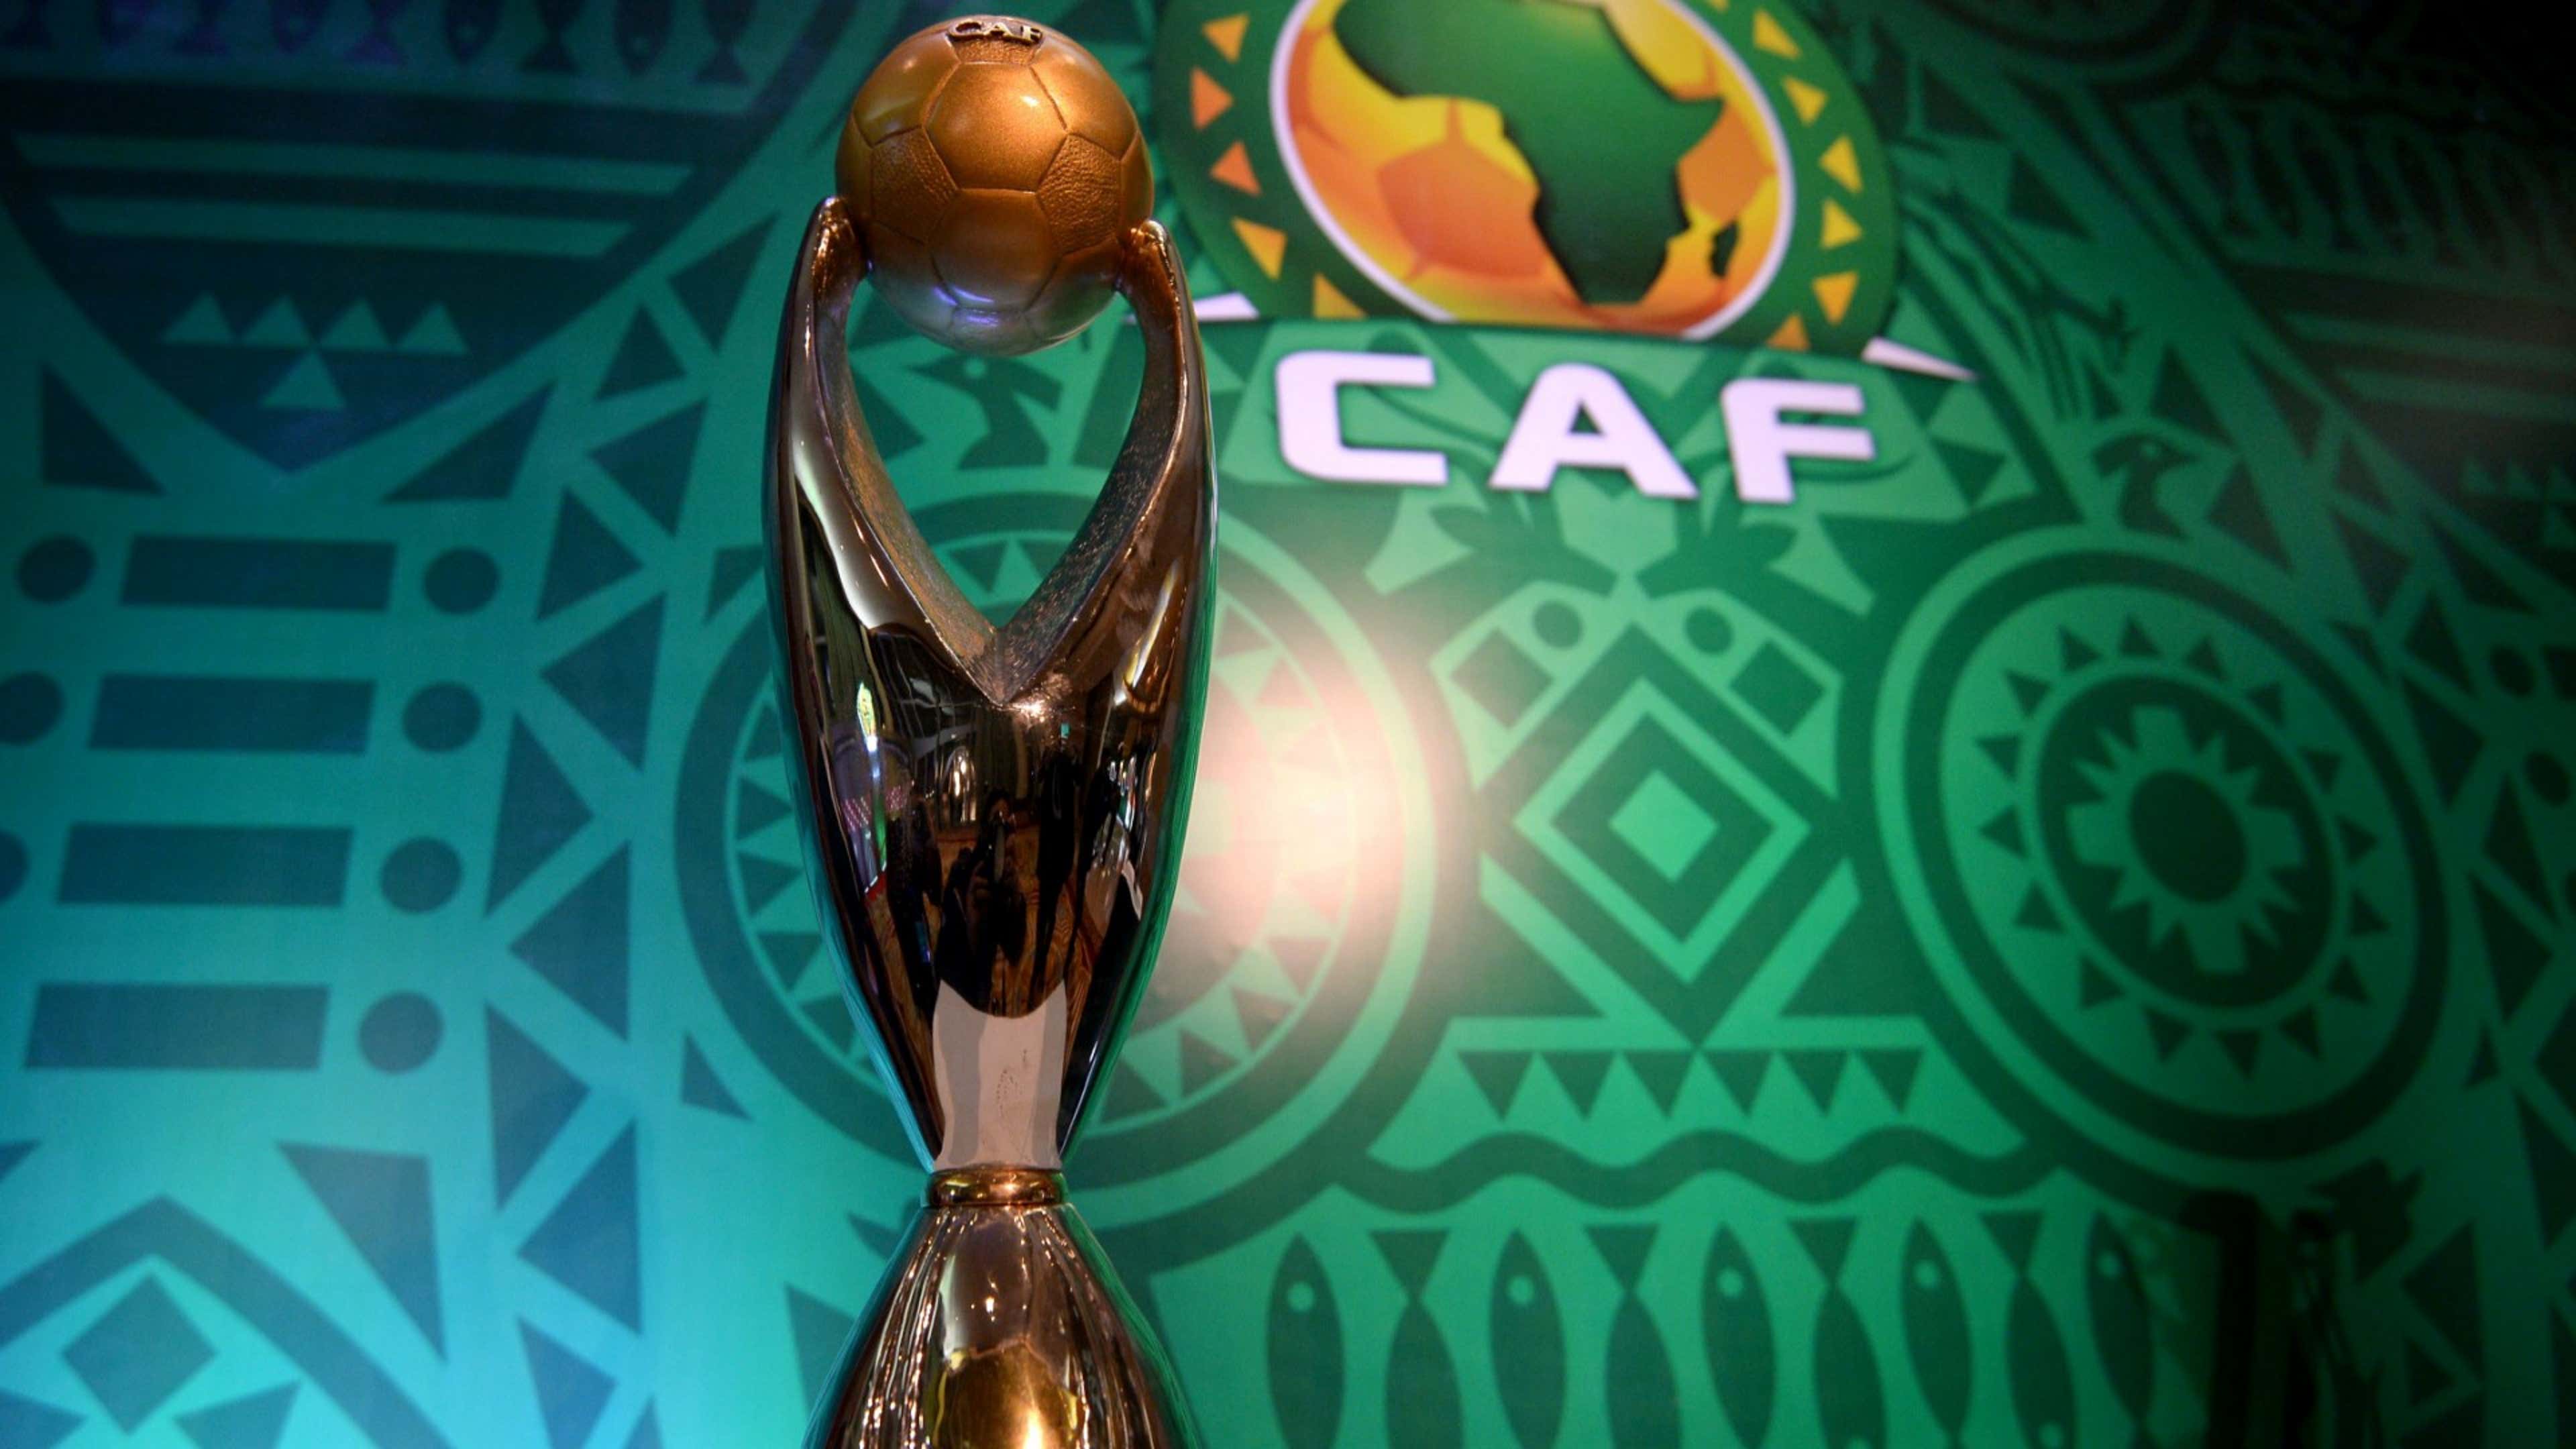 CAF Champions League Draw